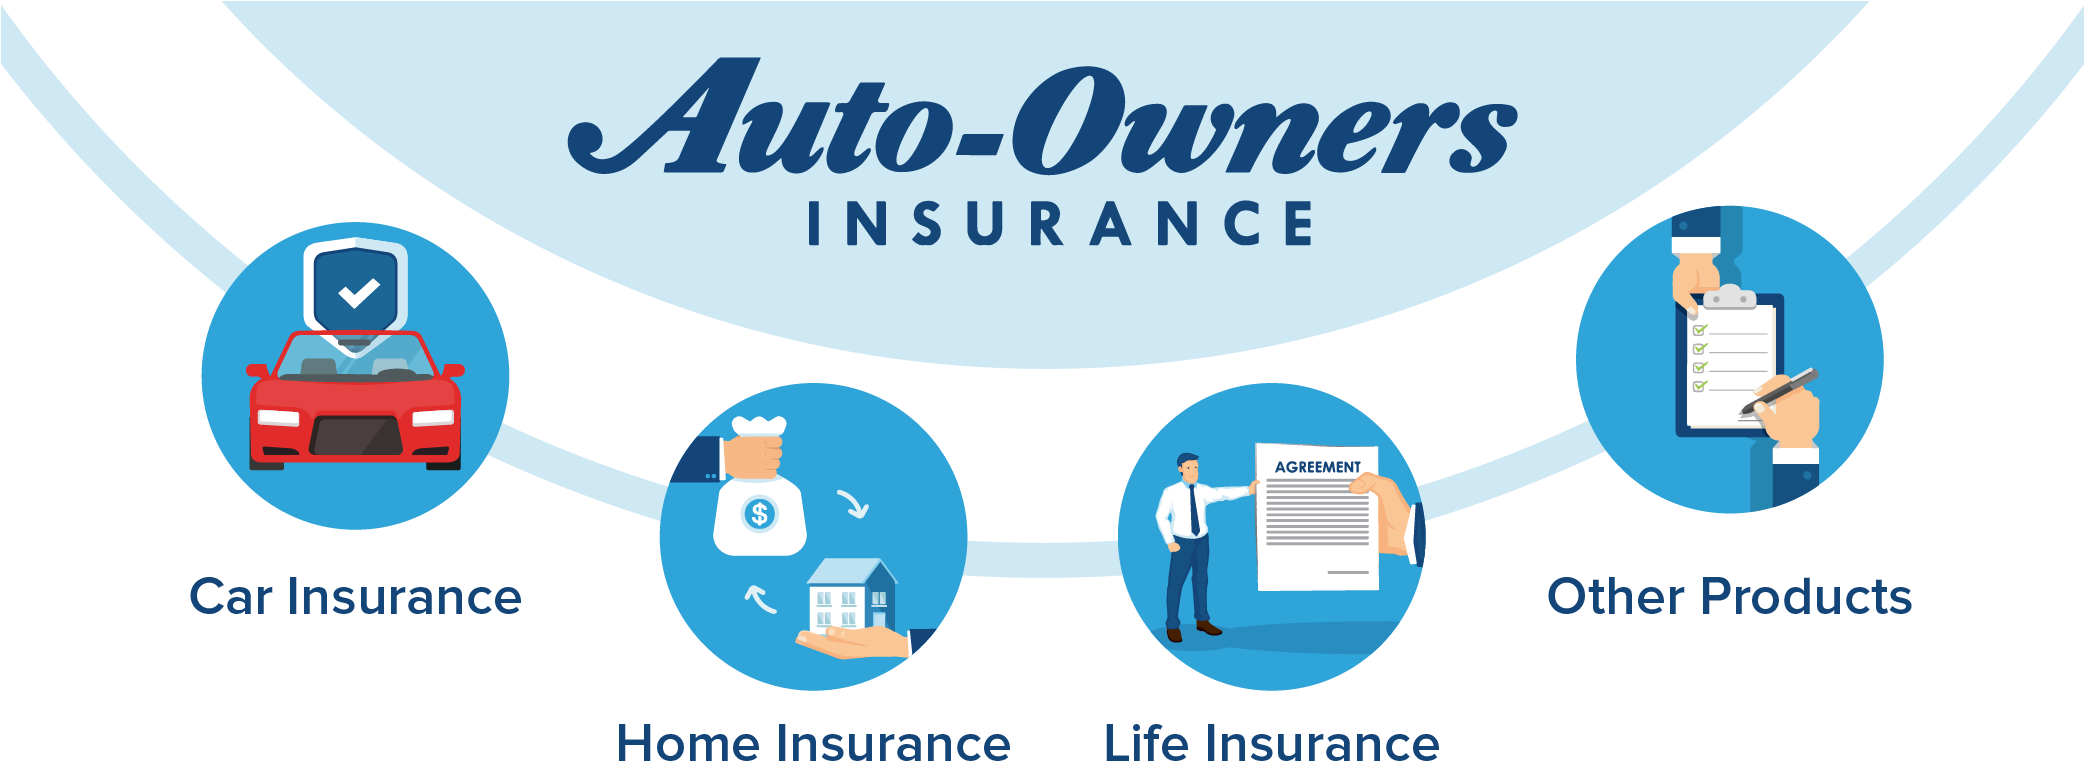 Full Size Of Home Insurance - Auto Owners Insurance (2083x818)